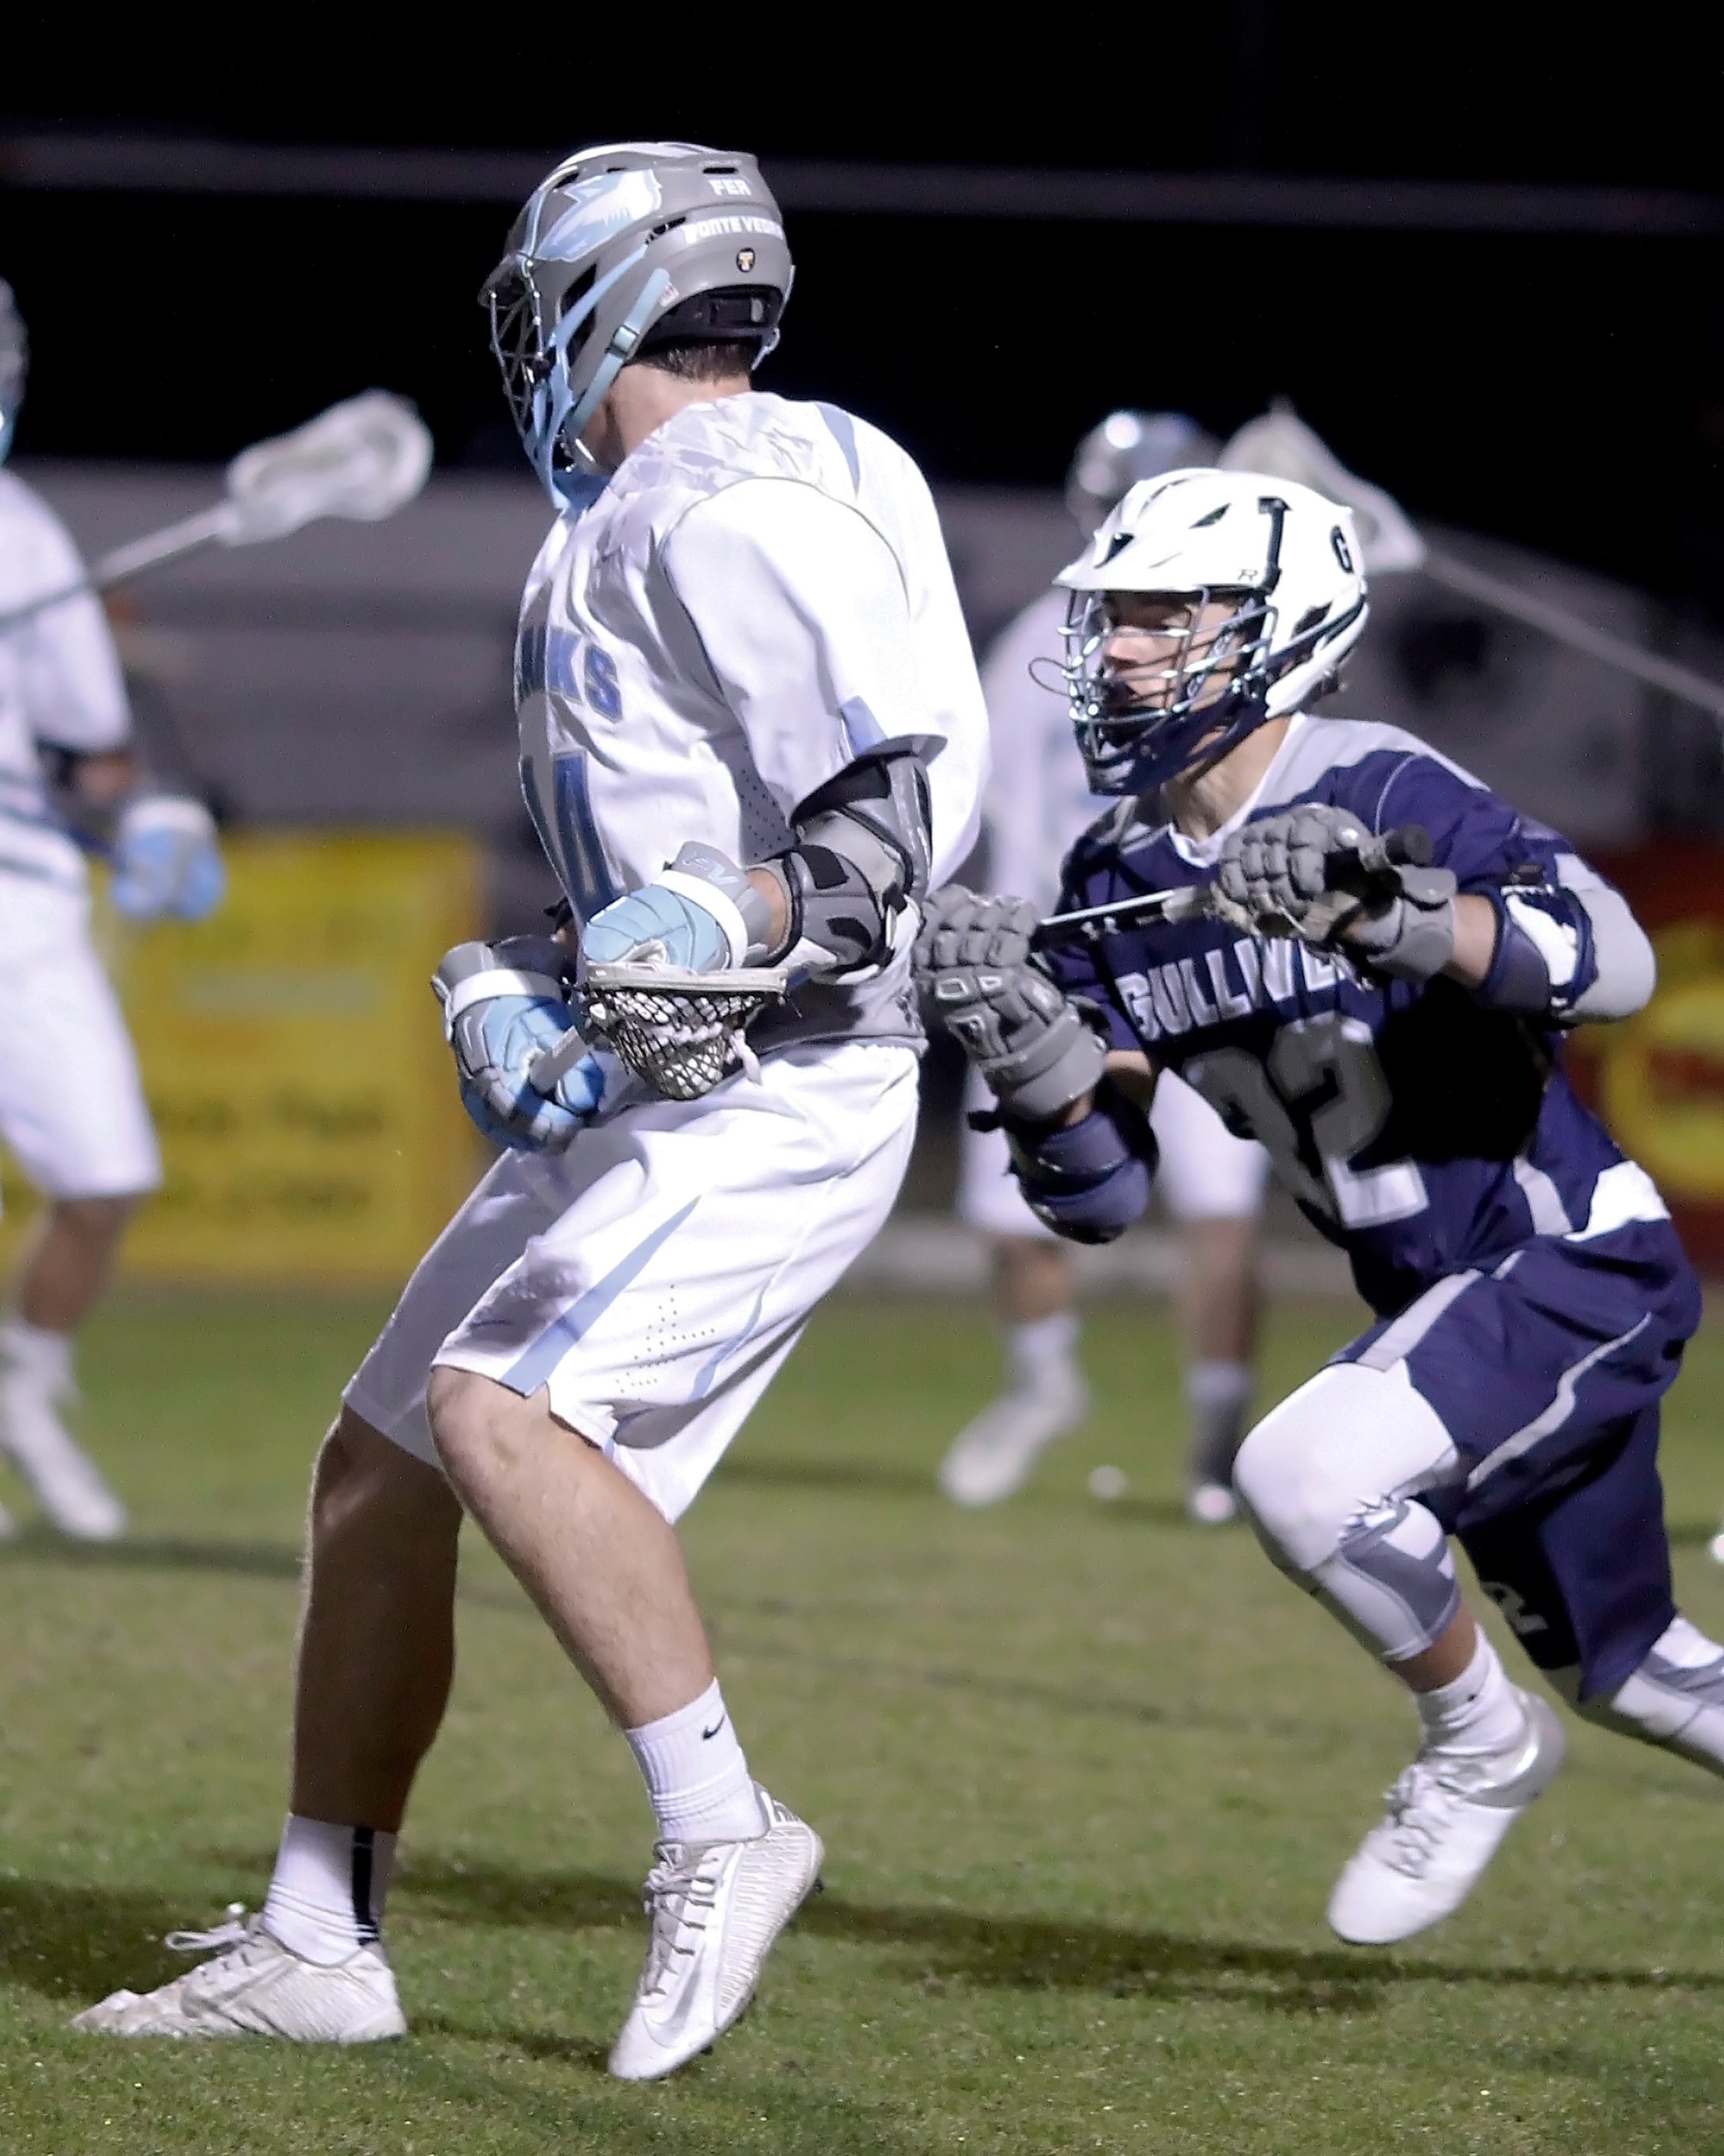 #14 Clay Welch of the Sharks protects the ball from a pressing Gulliver defender